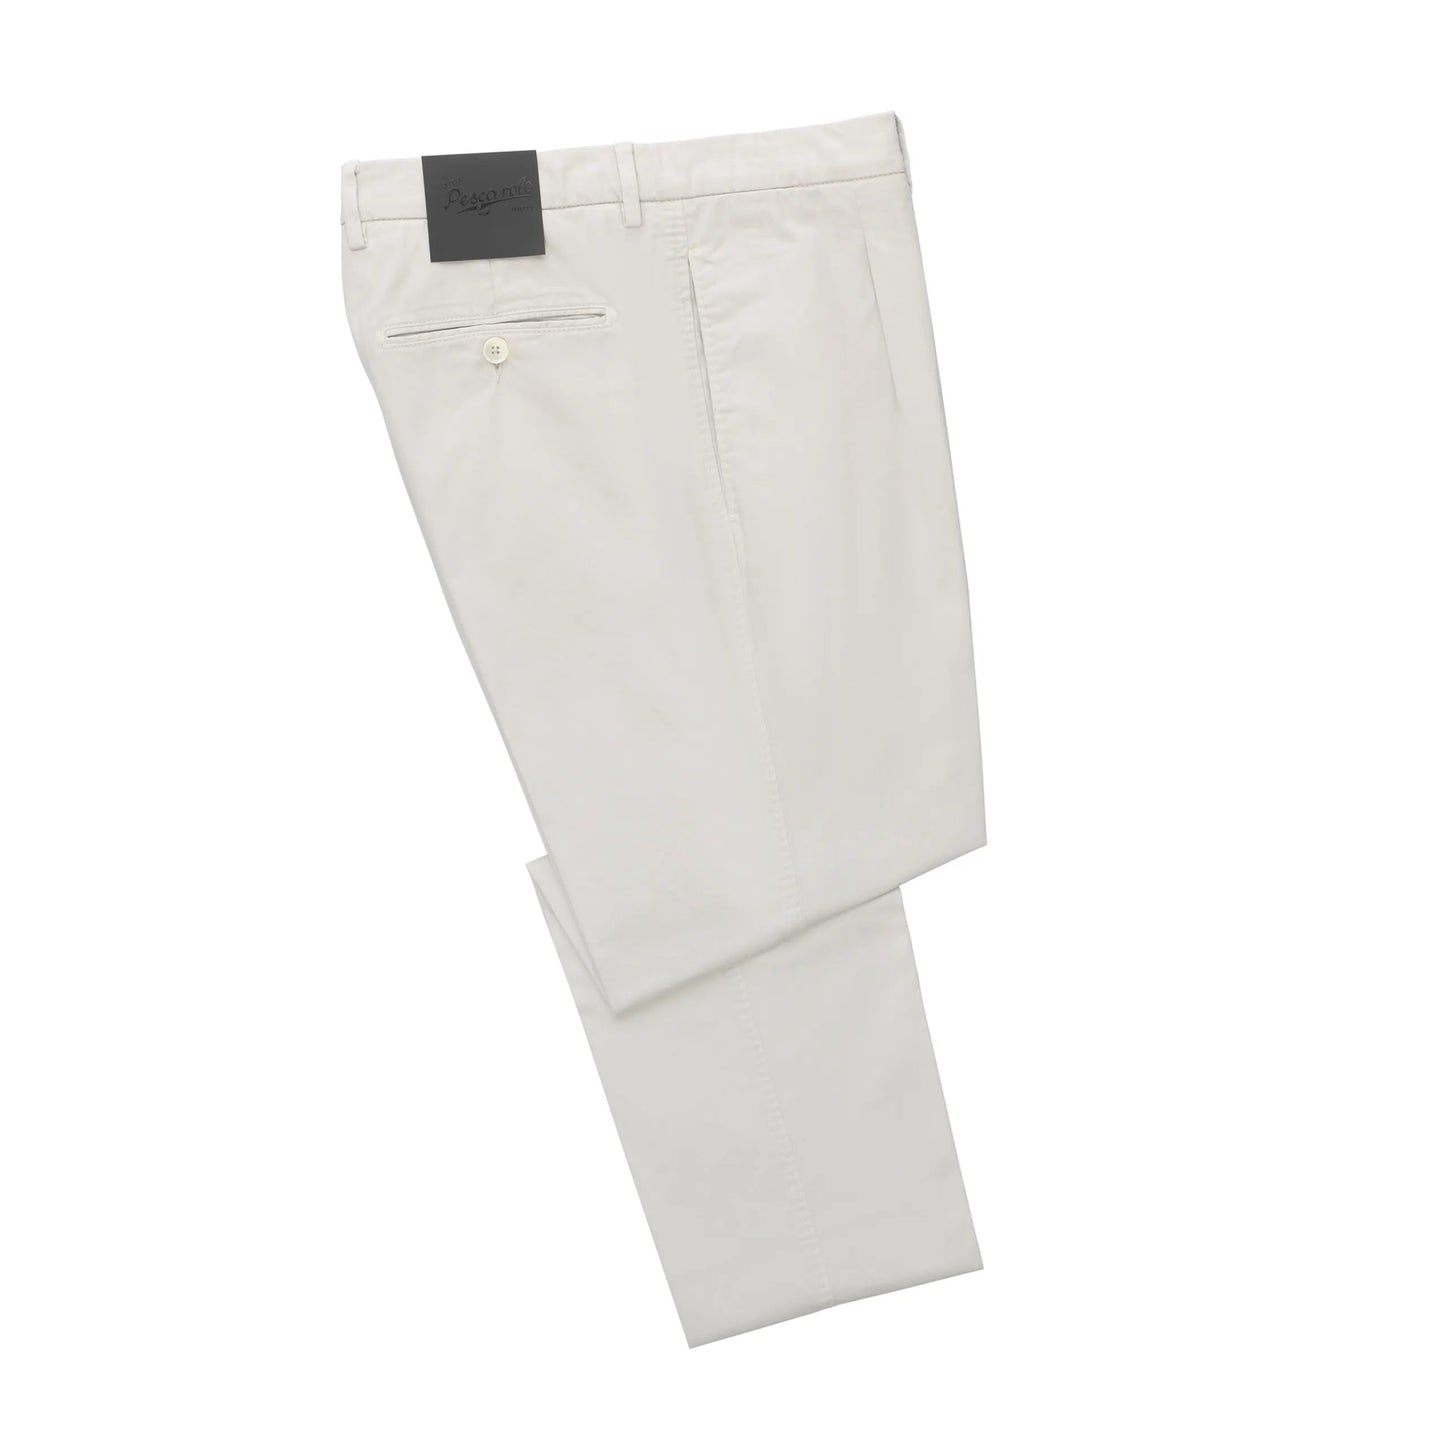 Marco Pescarolo Slim - Fit Stretch - Cotton Jeans in Quill Grey - SARTALE